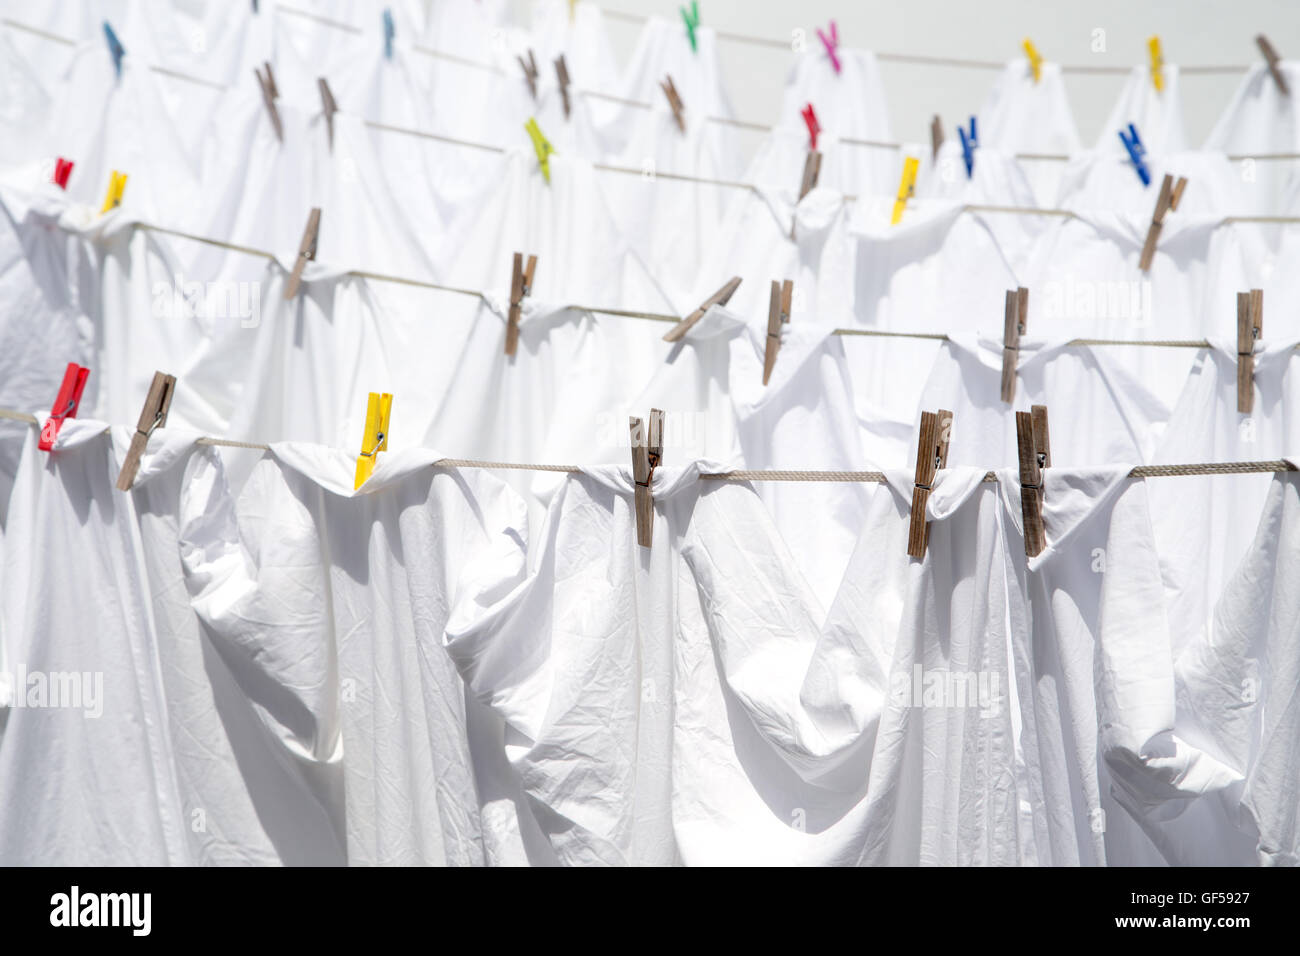 White sheets drying in the sun Stock Photo